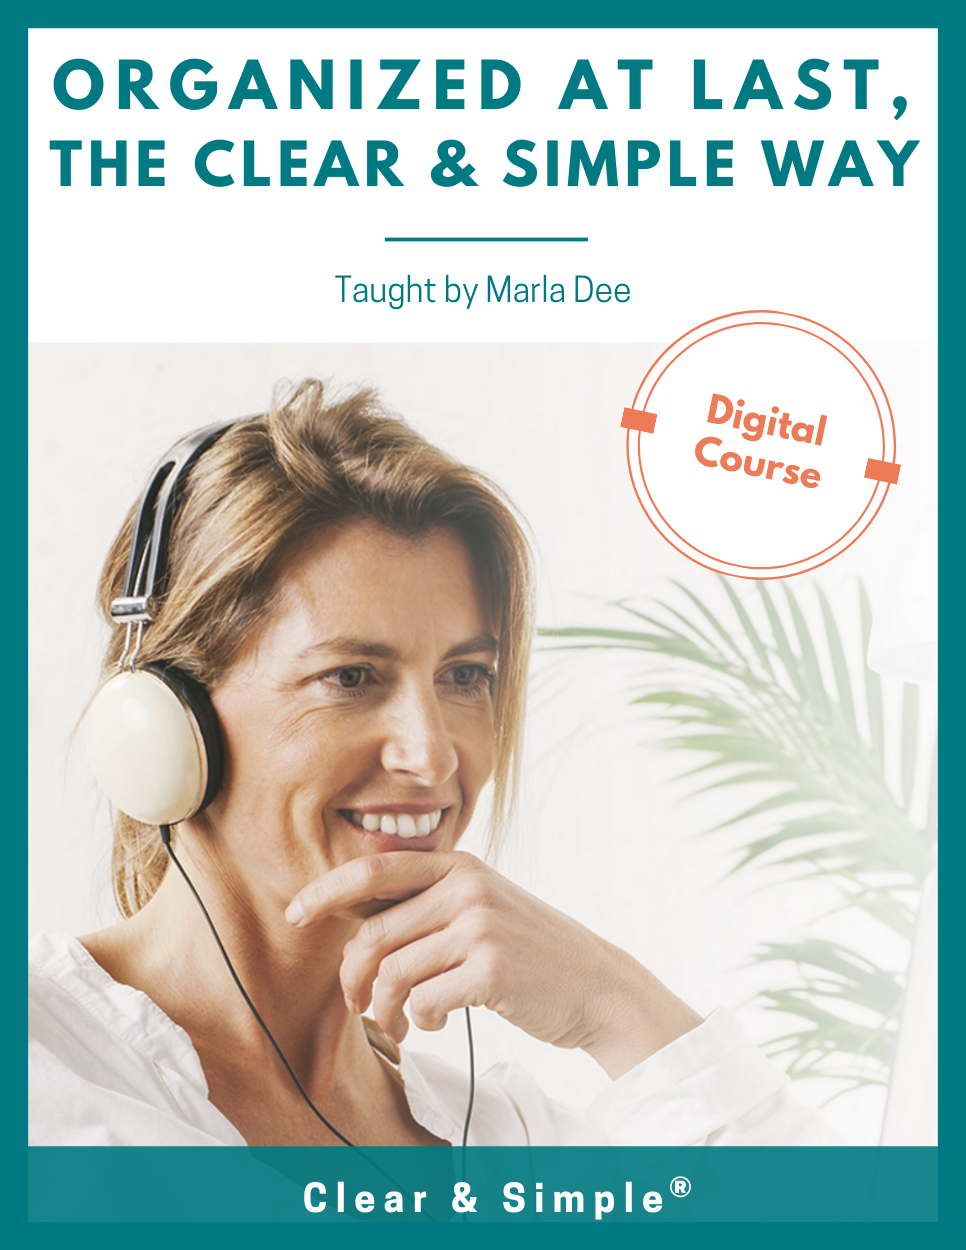 Clear & Simple, SEE IT. MAP IT. DO IT., Get Organized The Clear & Simple Way, Digital Course, Organizing Course